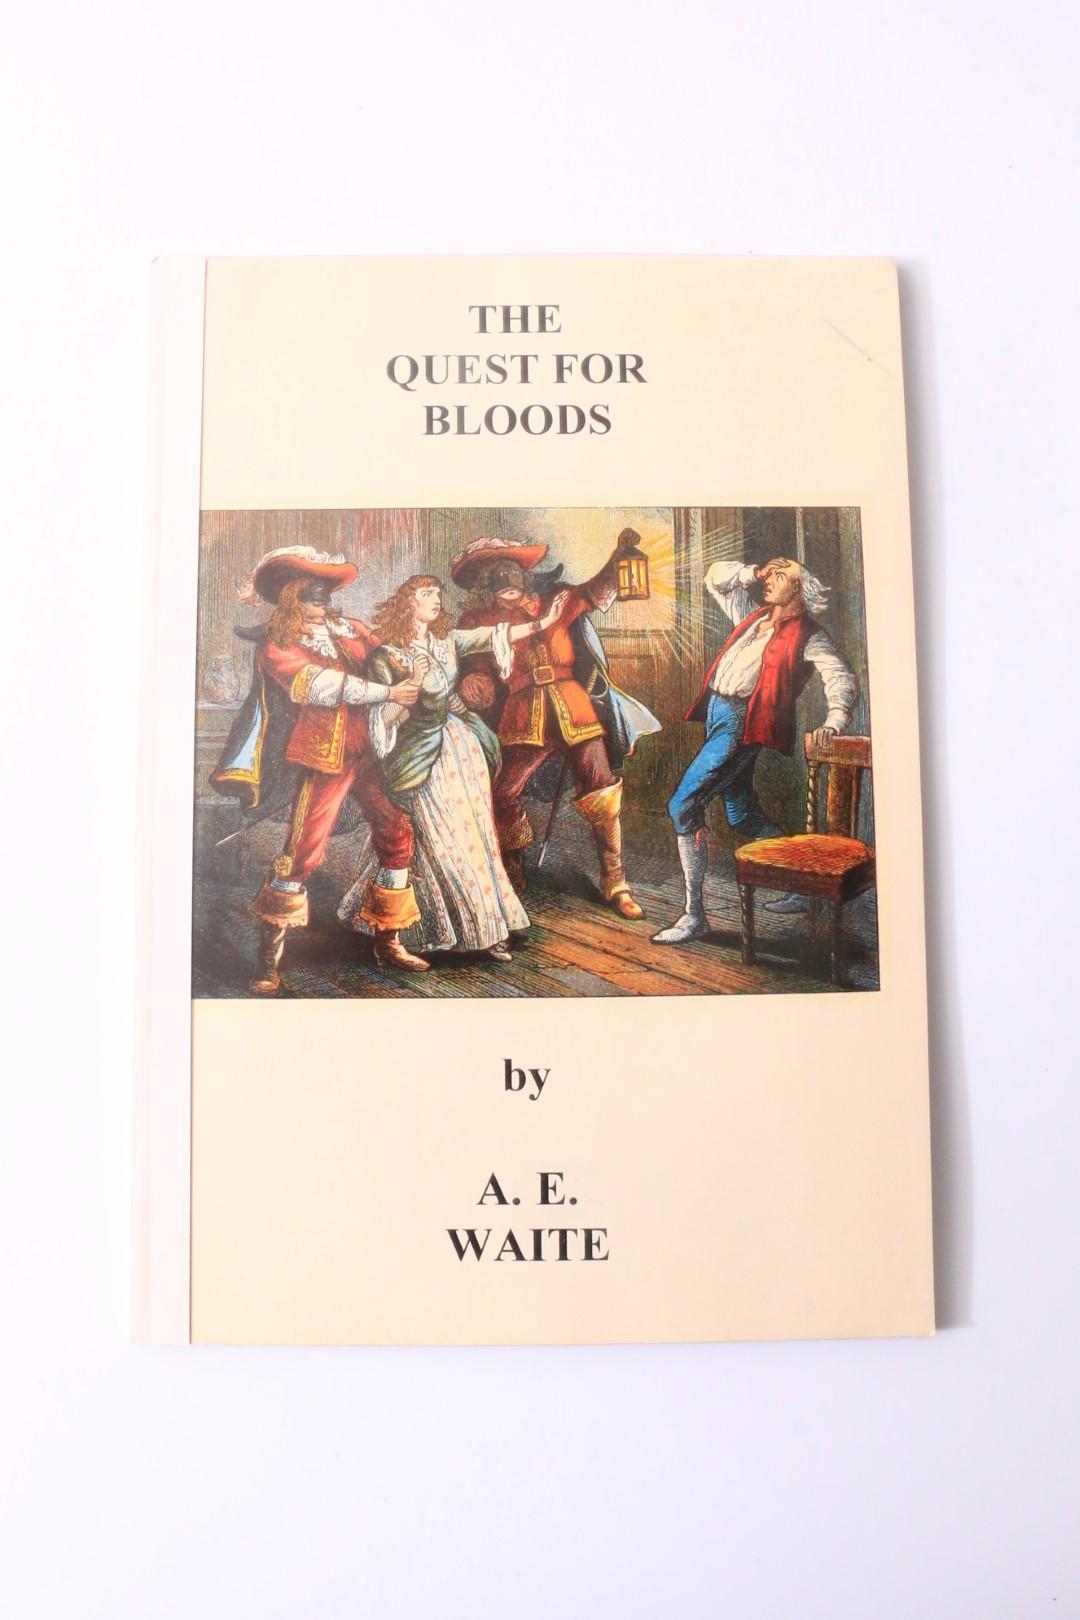 A.E. Waite - The Quest for Bloods - DaDeOOL, 1995, Limited Edition.